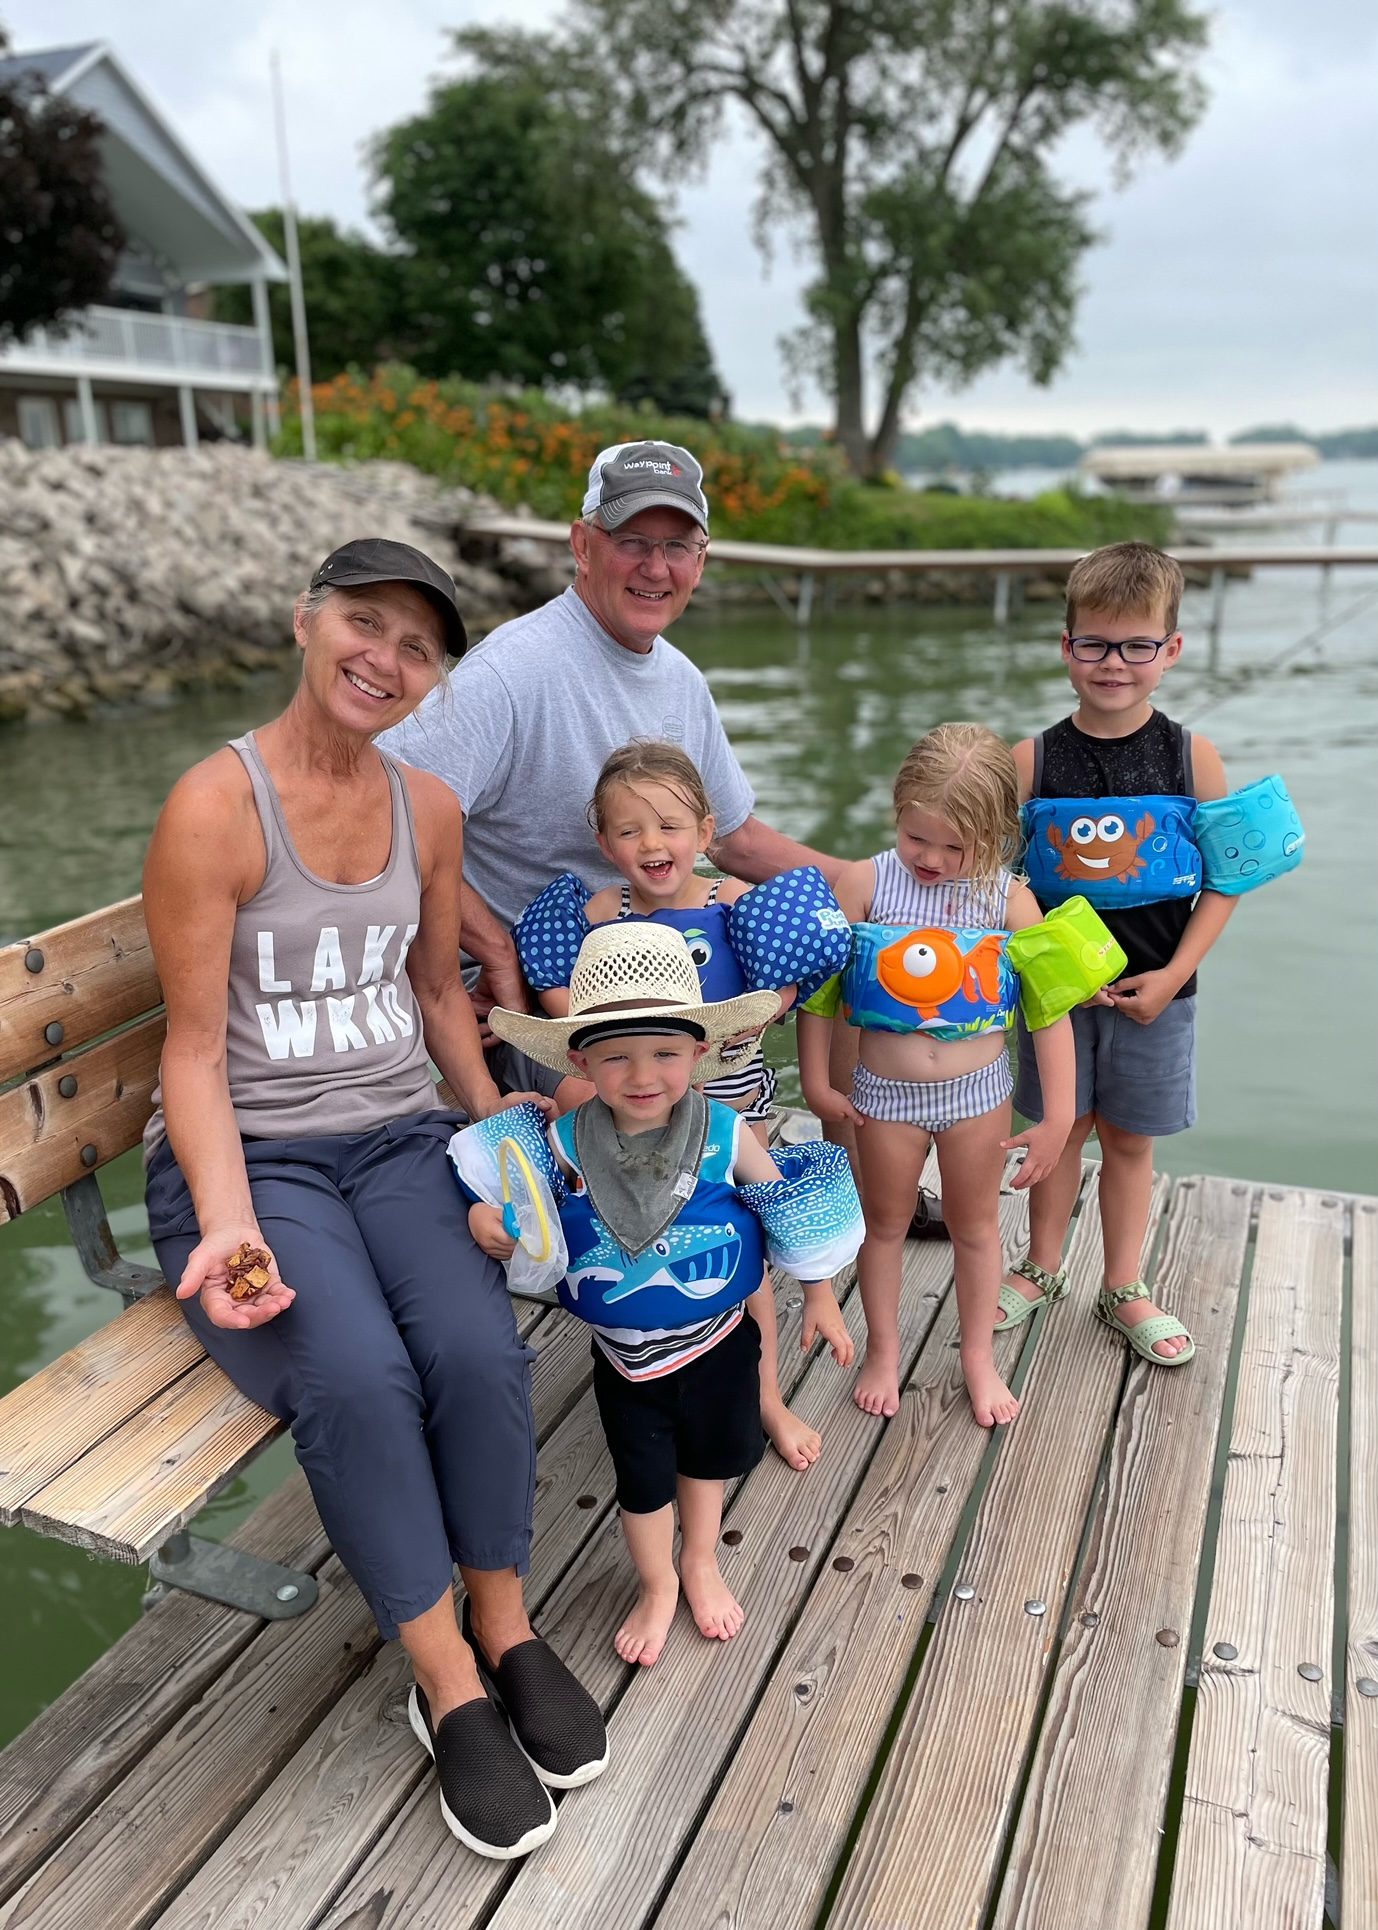 Kirk and wife with grandkids at a dock